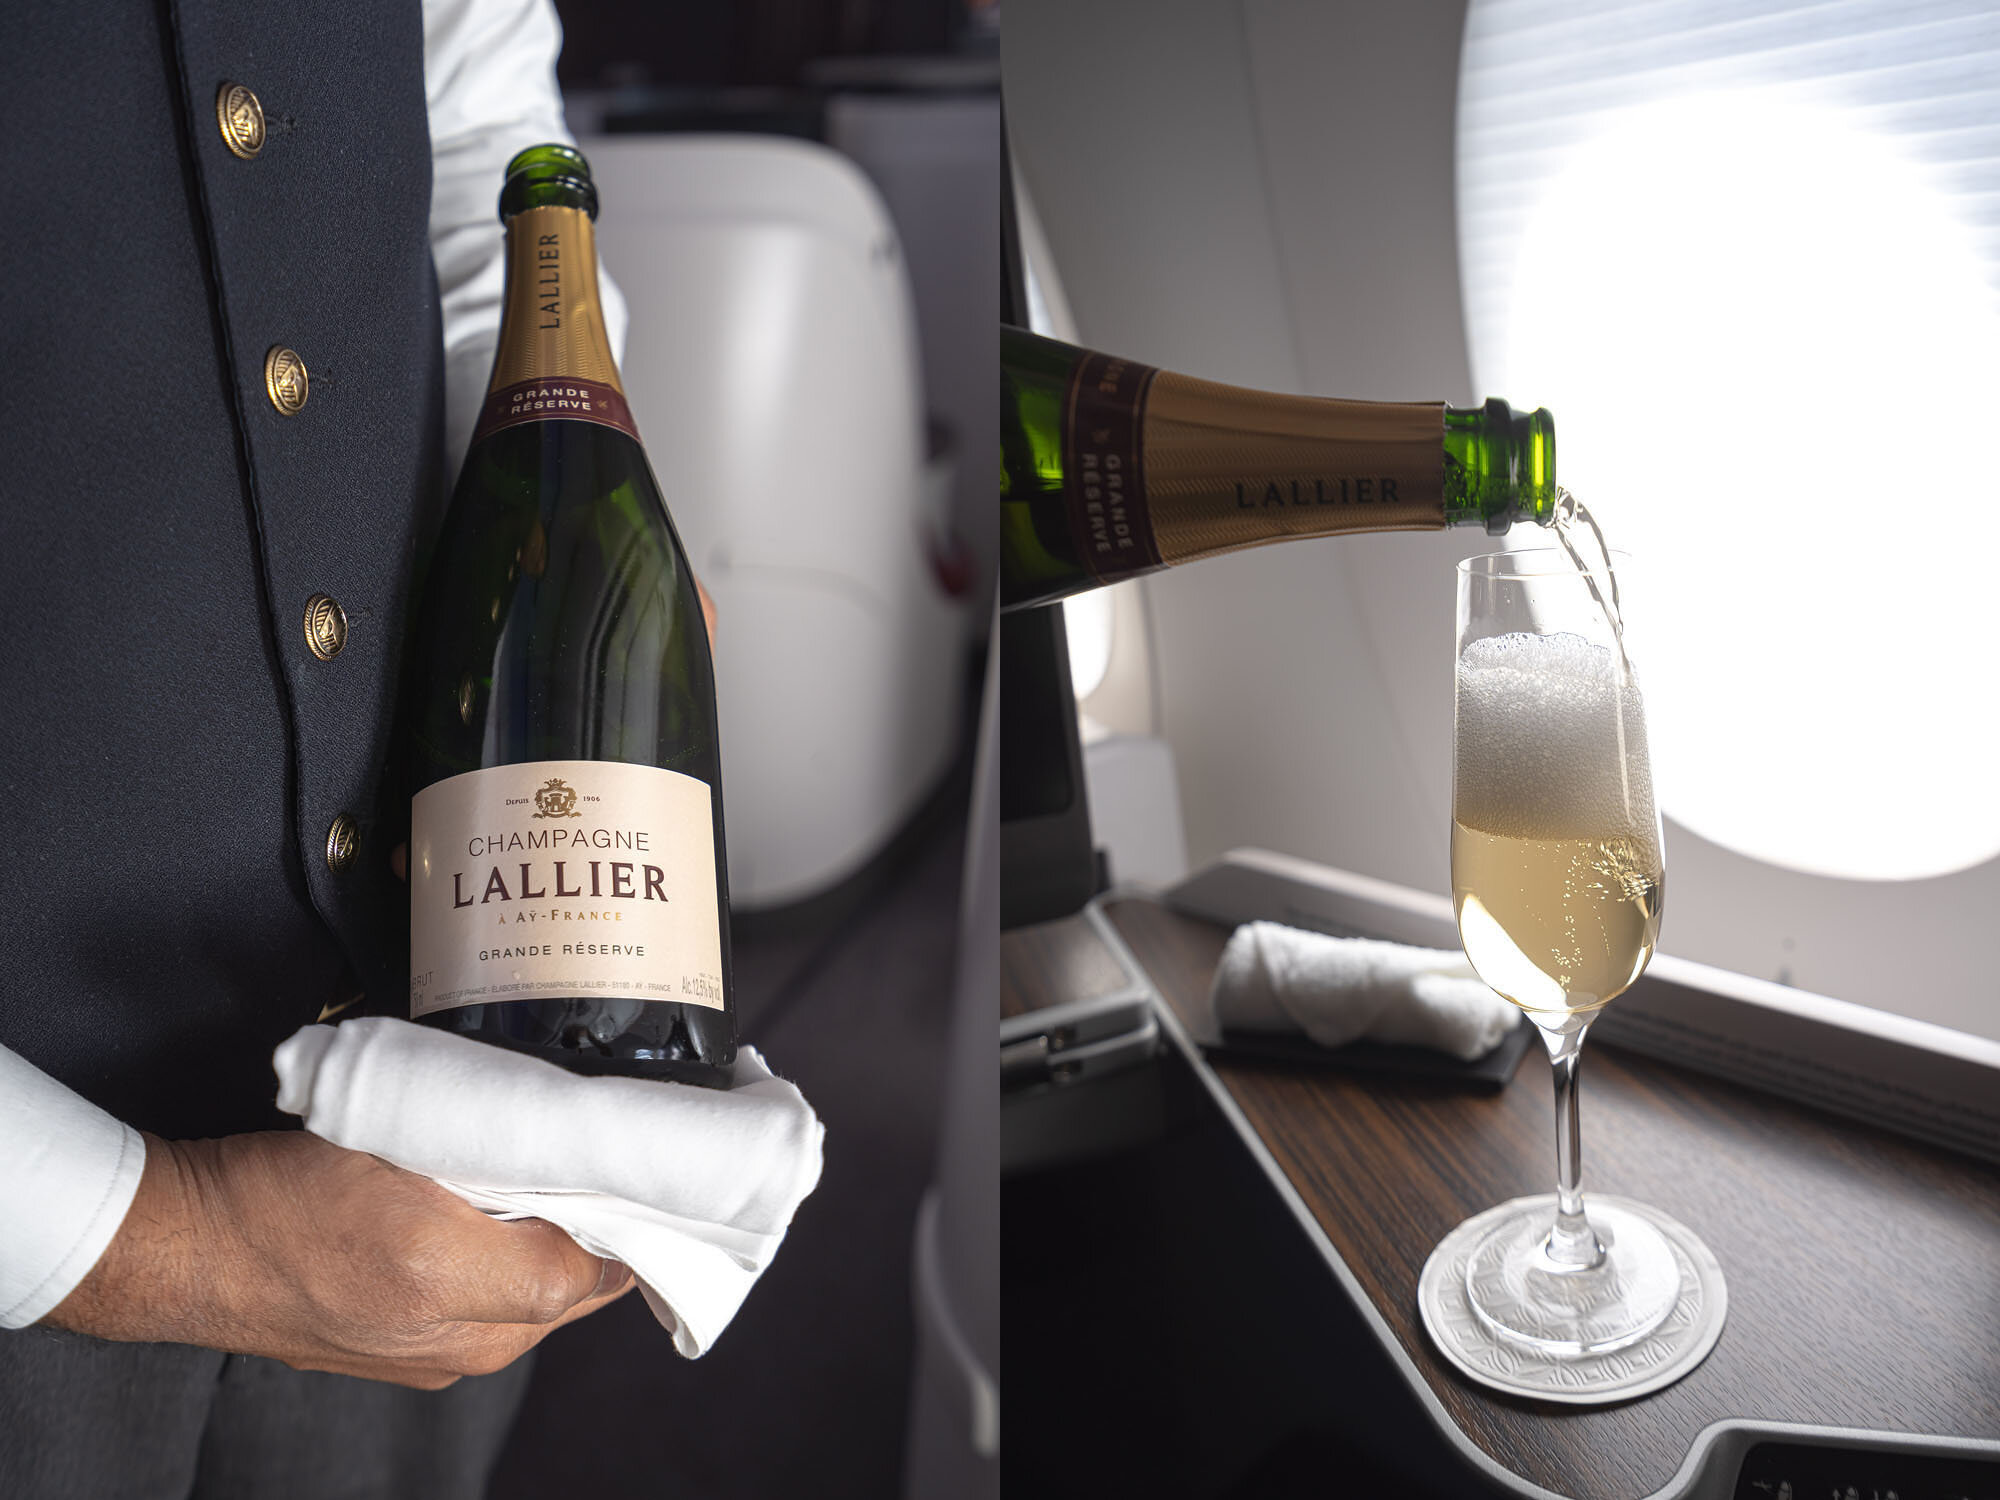 Lallier Grande Reserve Champagne and hot towel before take-off